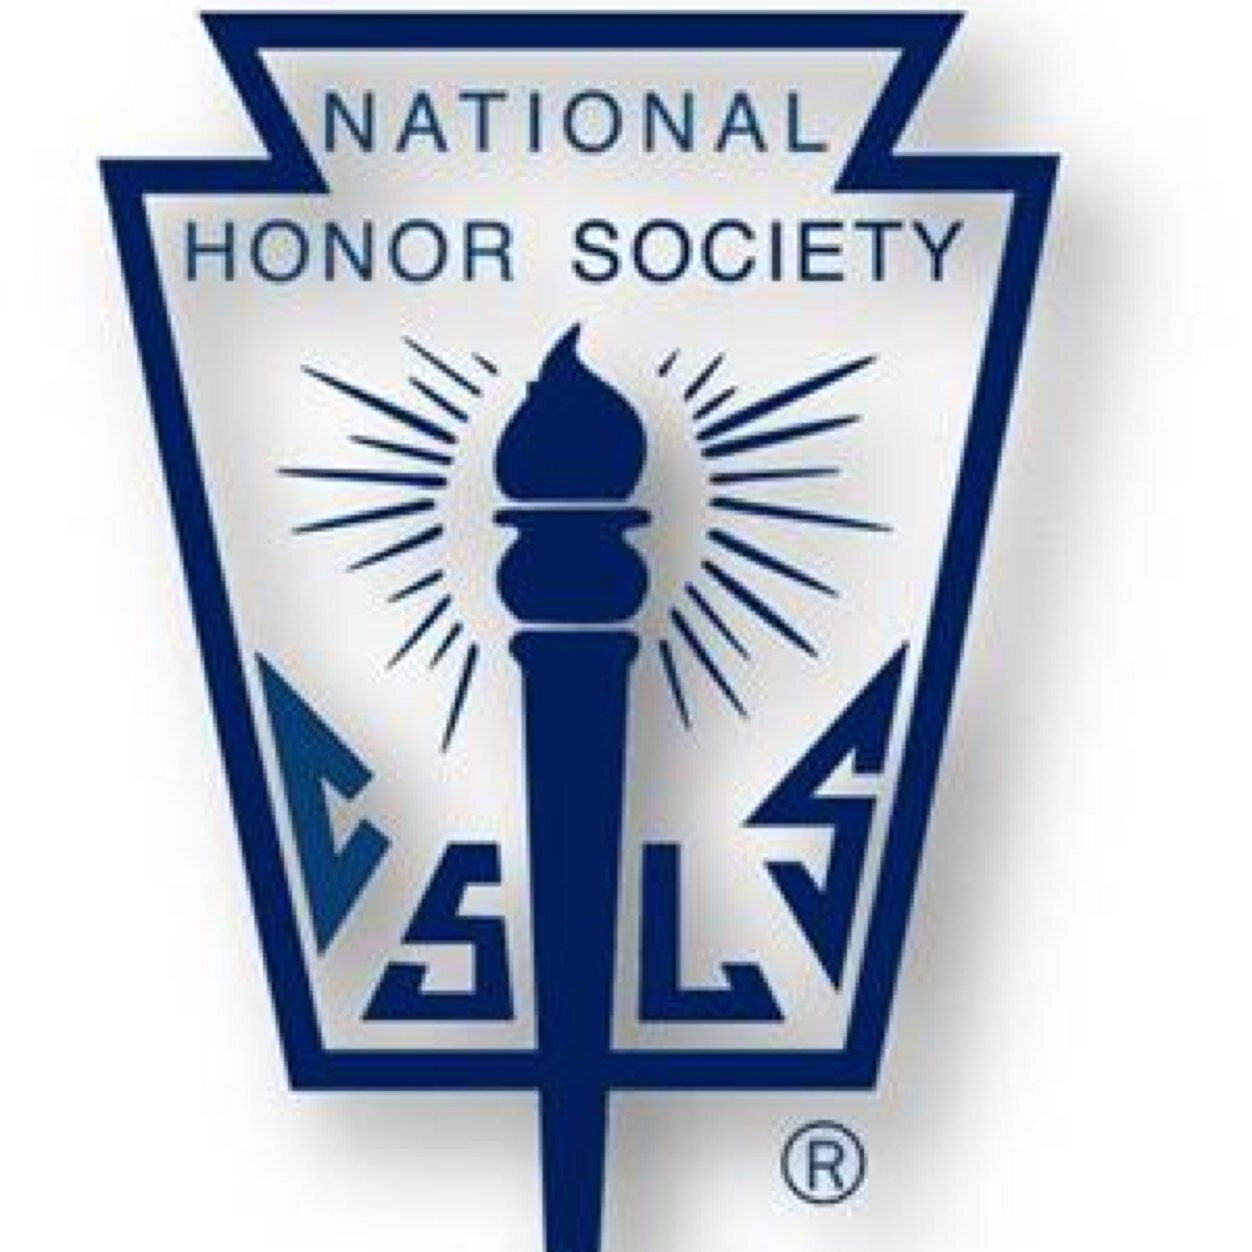 Twitter account for the National Honor Society of Blackford High School.